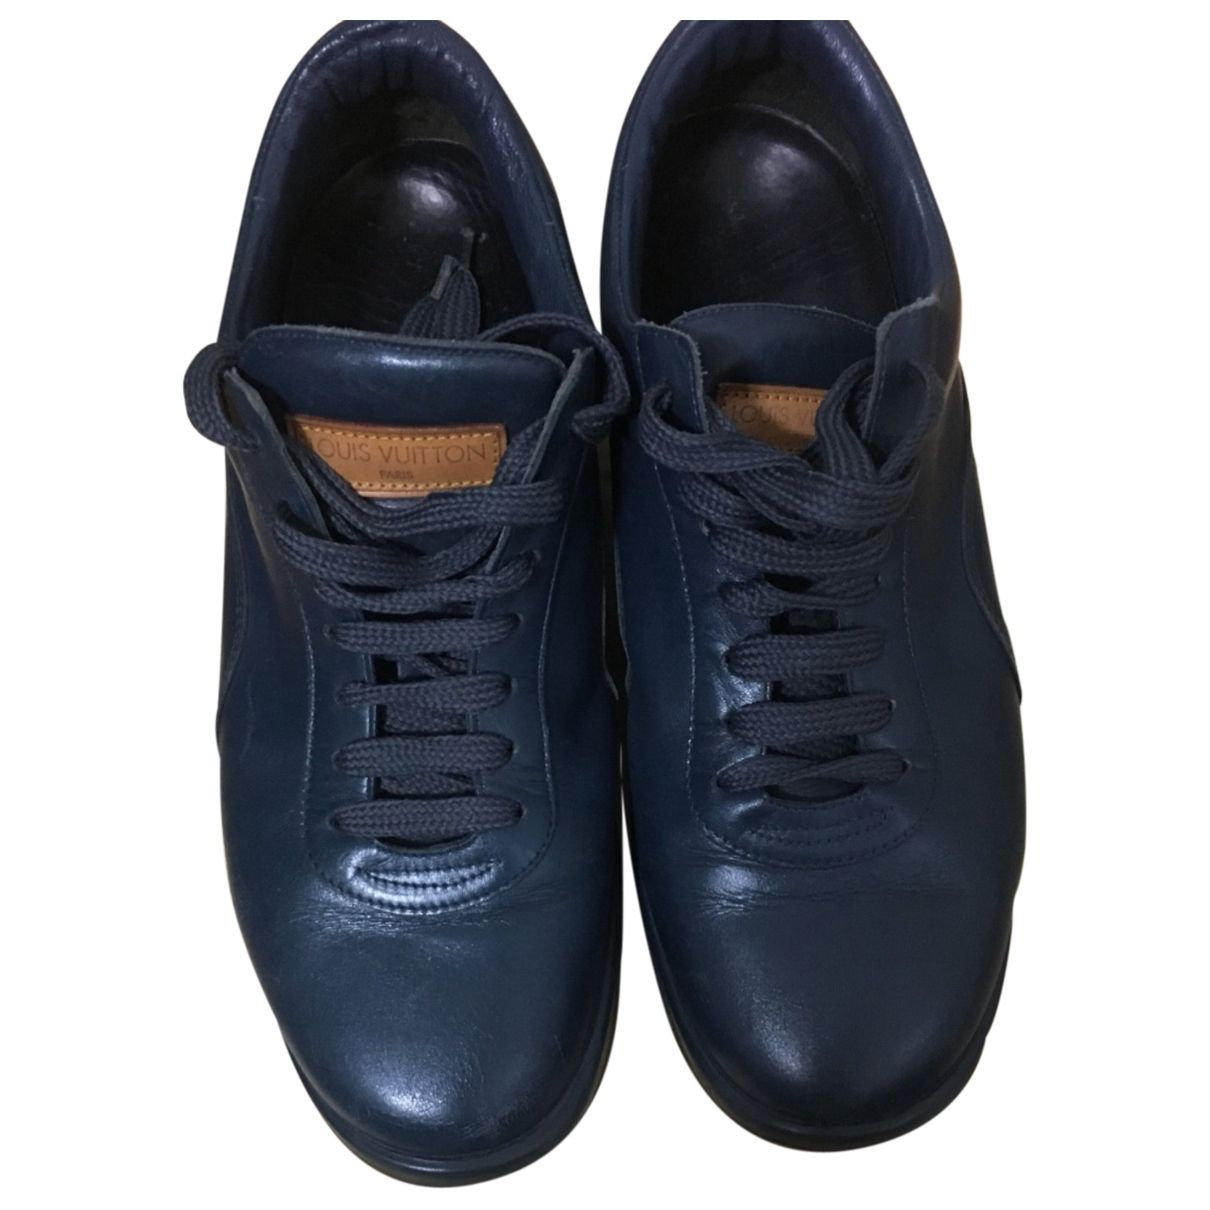 Leather trainers Louis Vuitton Blue size 39.5 EU in Leather - 8039153